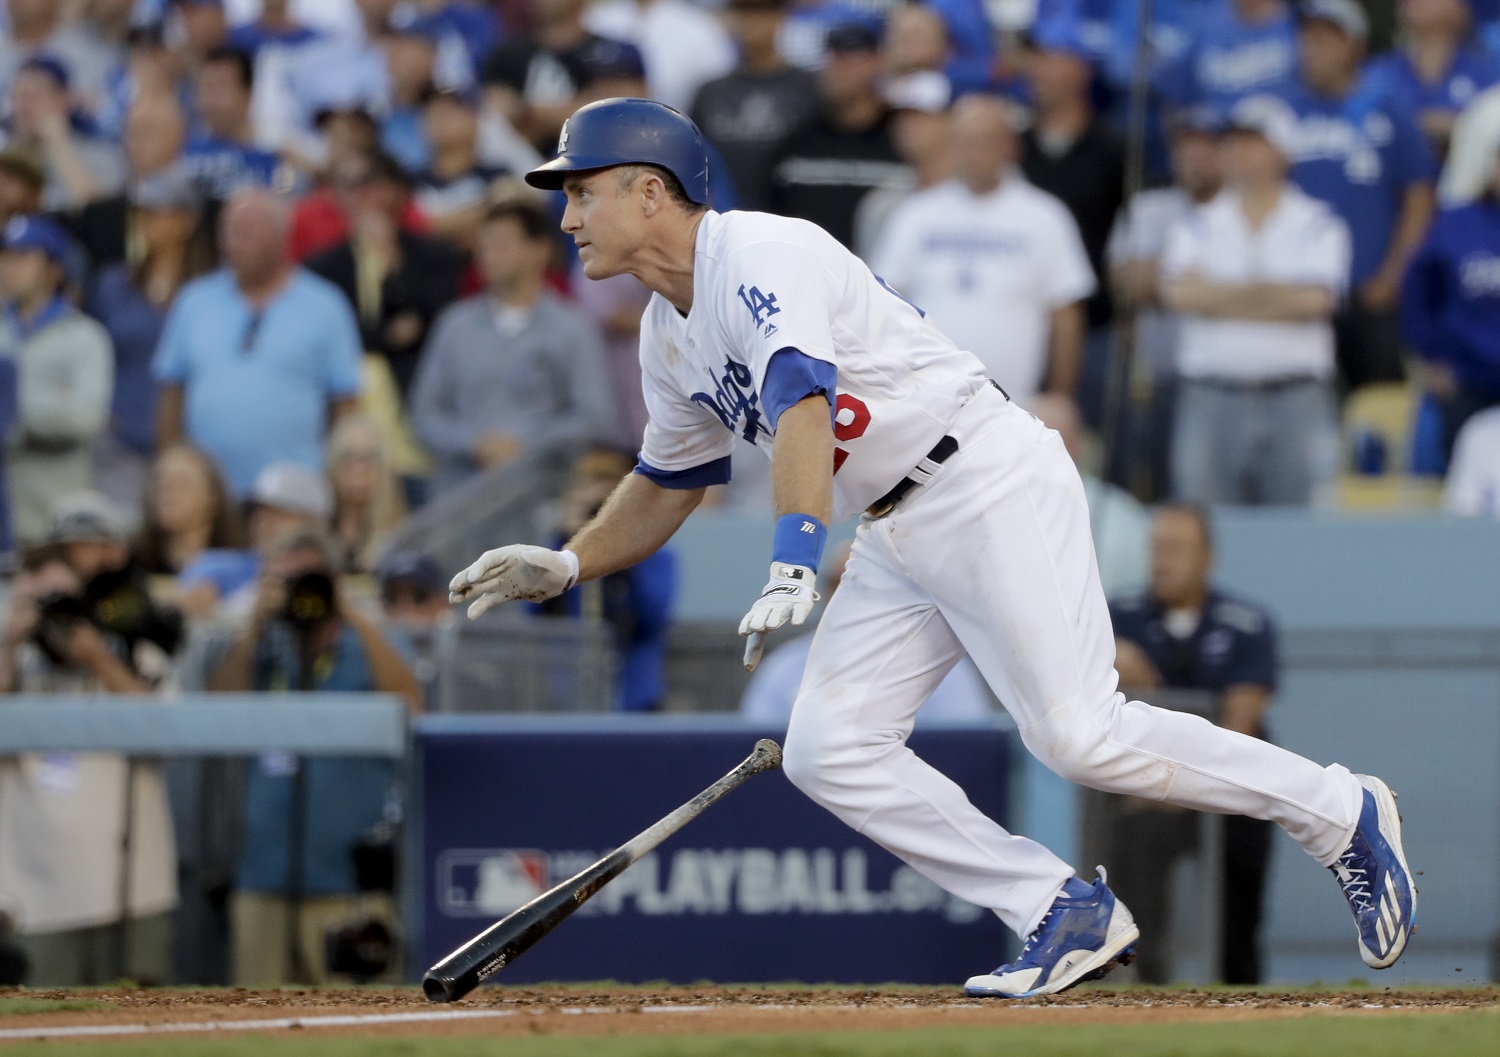 Los Angeles Dodgers' Chase Utley watches his RBI-single during the eighth inning in Game 4 of a baseball National League Division Series against the Washington Nationals in Los Angeles, Tuesday, Oct. 11, 2016. (AP Photo/Jae C. Hong)